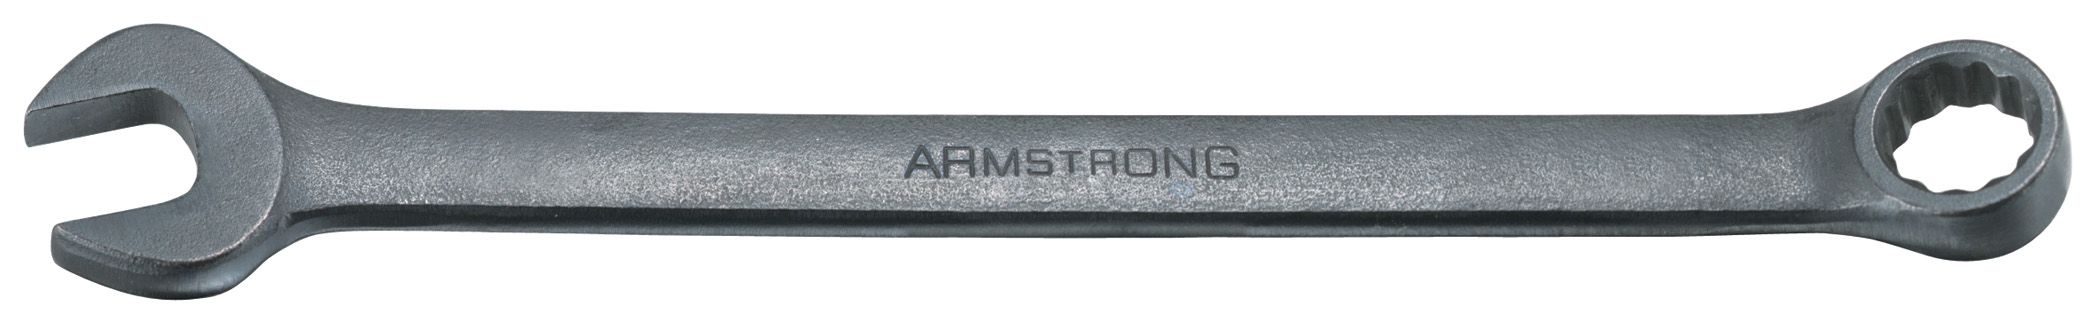 Armstrong 2-1/16 in. 12 pt. Black Oxide Long Combination Wrench